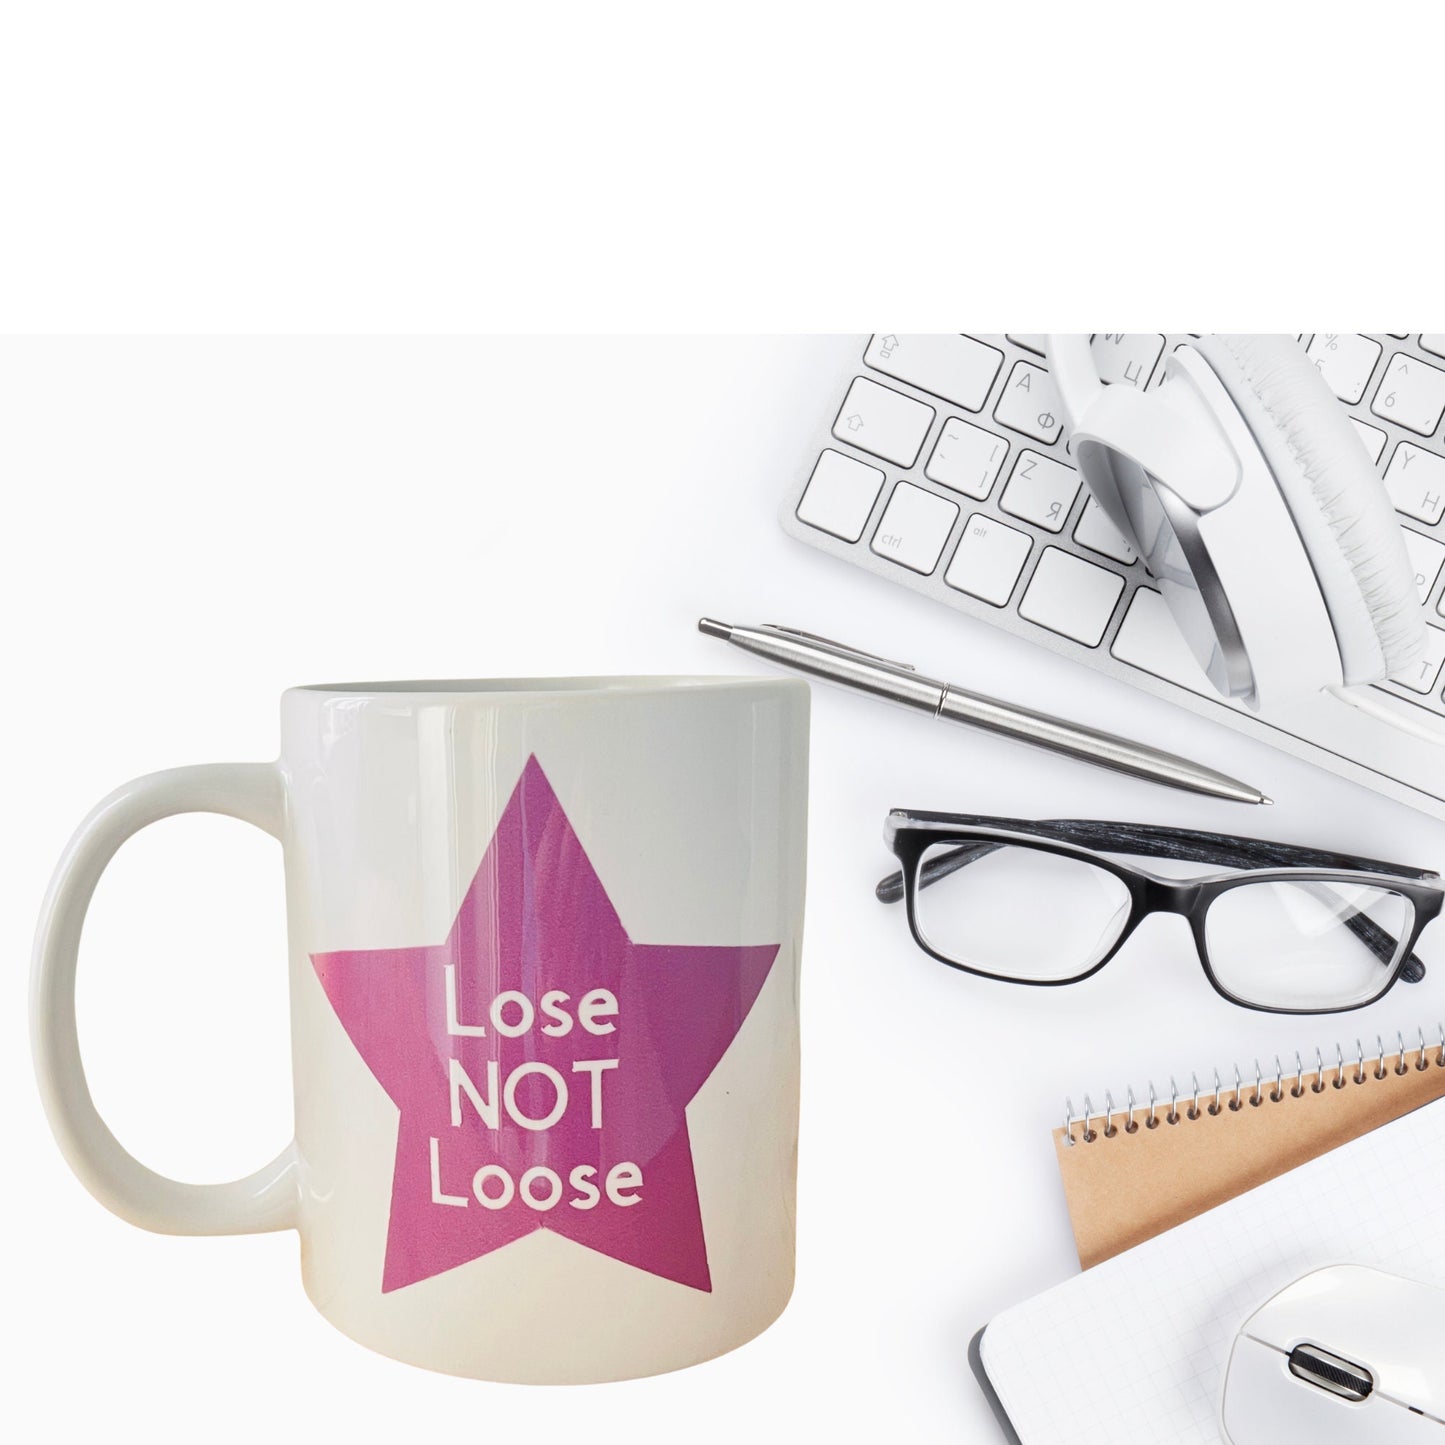 Spelling and Grammar Mug Gifts for Teacher Aitch not Haitch English Language Lover’s Mug Lose not Loose Correct Spelling Coffee Cup Mug Gift